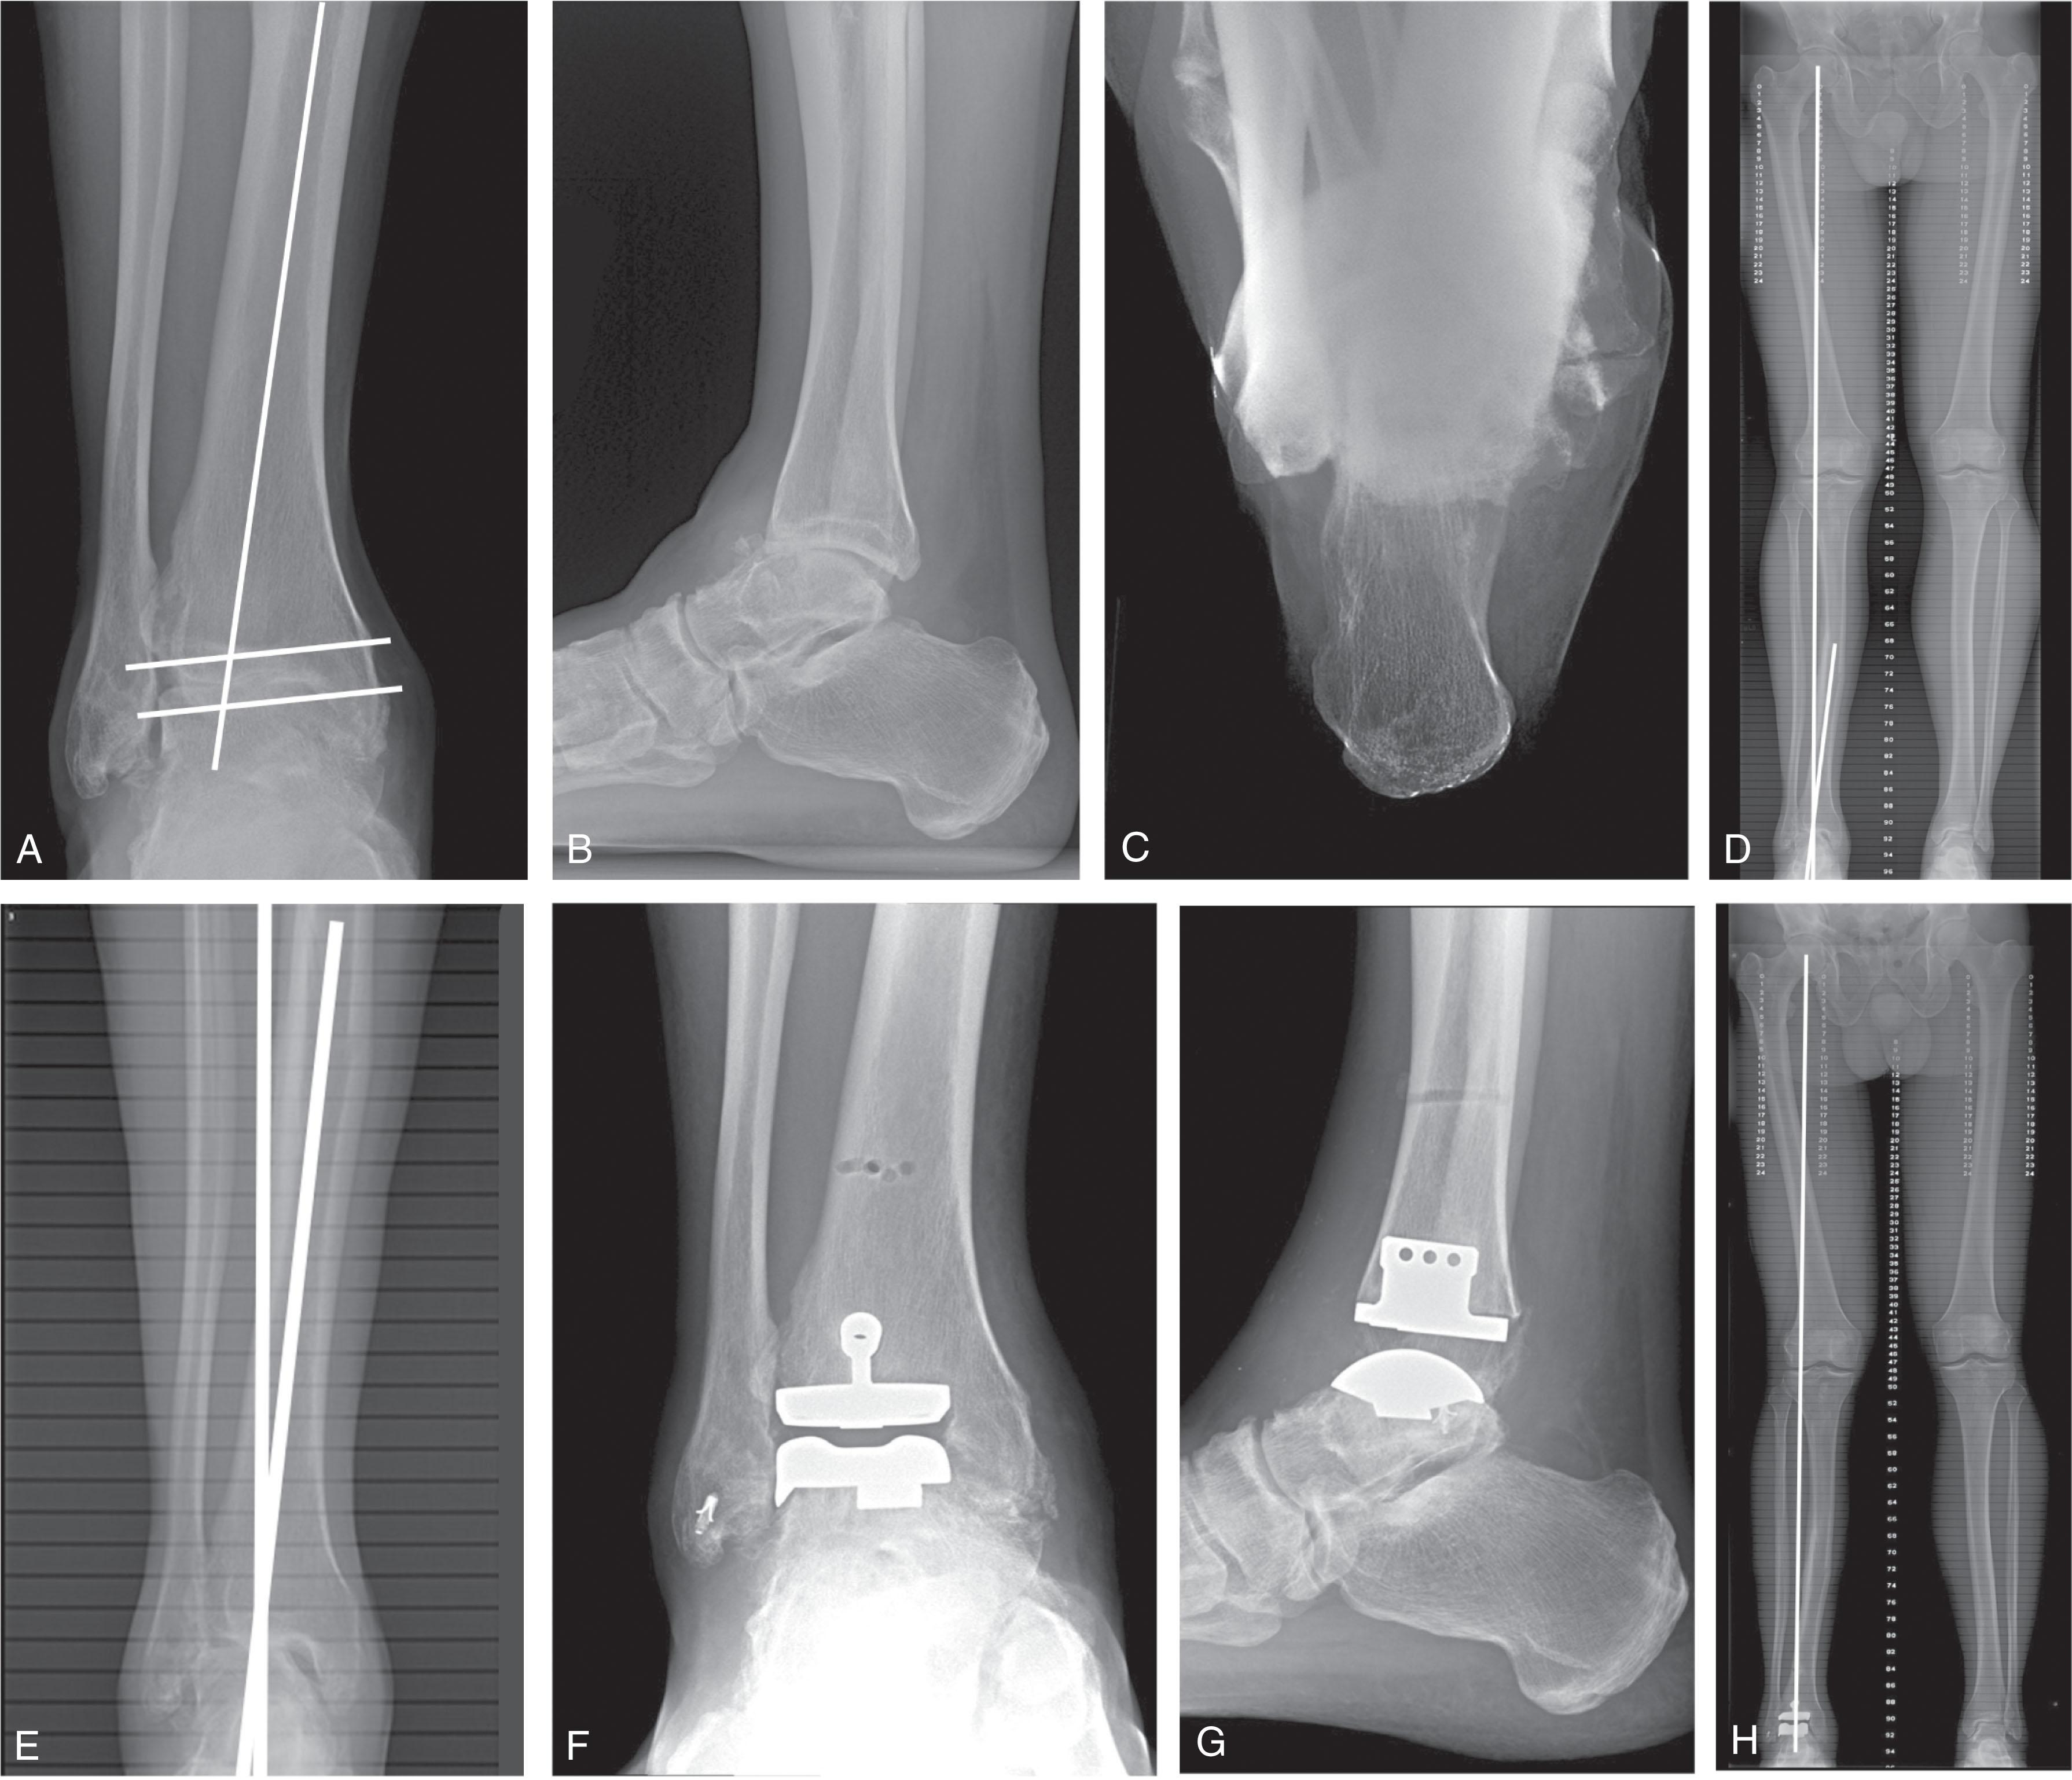 Fig. 23-14, Accommodating a tibial deformity by adjusting total ankle bone cuts. A and B , Anteroposterior and lateral radiographs showing ankle arthritis with a varus congruent deformity. Notice both the distal tibia and talus are angulated relative to the distal tibial anatomic axis but are relatively parallel to each other. C , Heel alignment view shows the hindfoot is in slight varus but of similar magnitude to the talus varus tilt, suggesting the deformity is not hindfoot driven. D and E , Long-leg alignment view plus close-up showing a diaphyseal mid-tibia valgus deformity. The hip to ankle mechanical axis is better aligned to the tibial plafond and talus than the distal one third tibial shaft. Rather than correcting the tibial deformity, in this case it was decided to adjust the tibial cut to match the hip to ankle mechanical axis. F and G , Anteroposterior and lateral radiographs after Salto Talaris total ankle replacement and lateral ligament repair. H , Postoperative long-leg alignment view. Notice the components are aligned to the hip to ankle mechanical axis rather than the distal tibial anatomic axis.